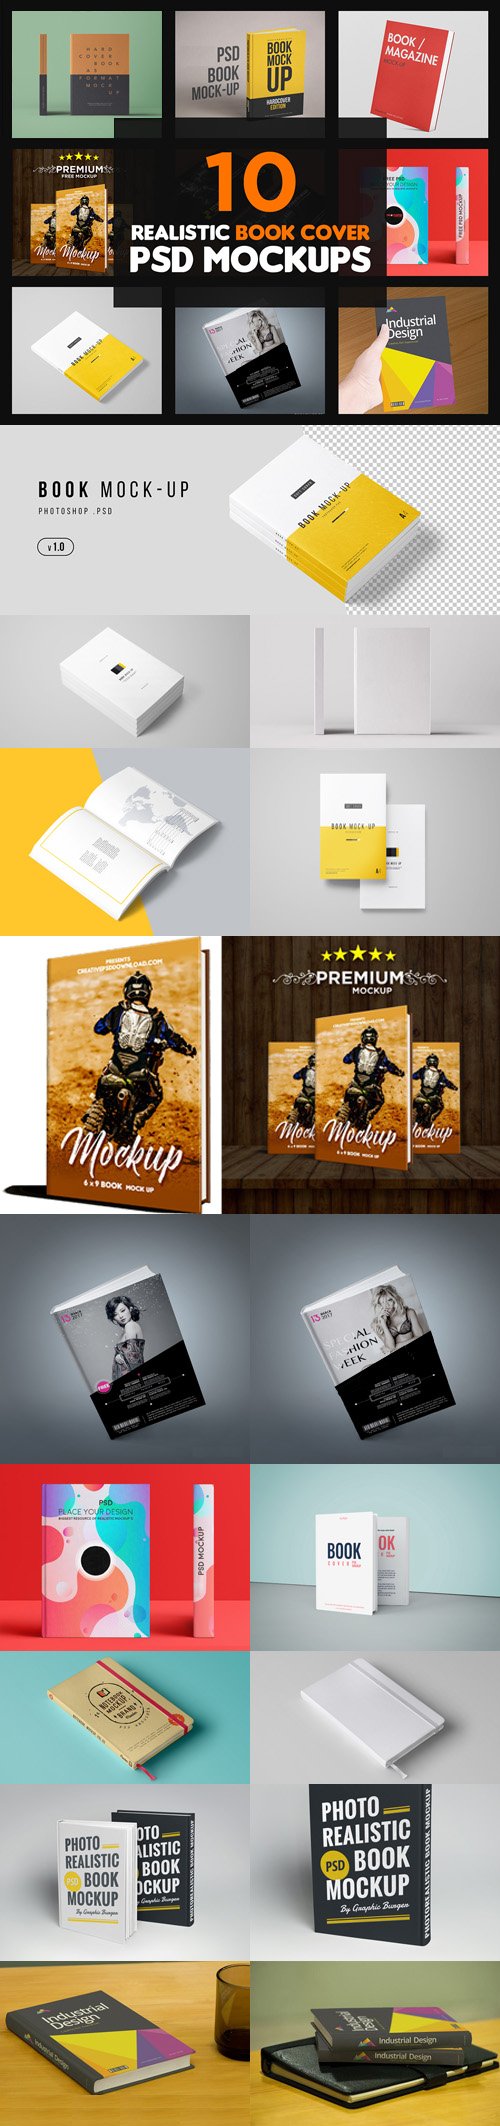 10 Realistic Book Cover PSD Mockups